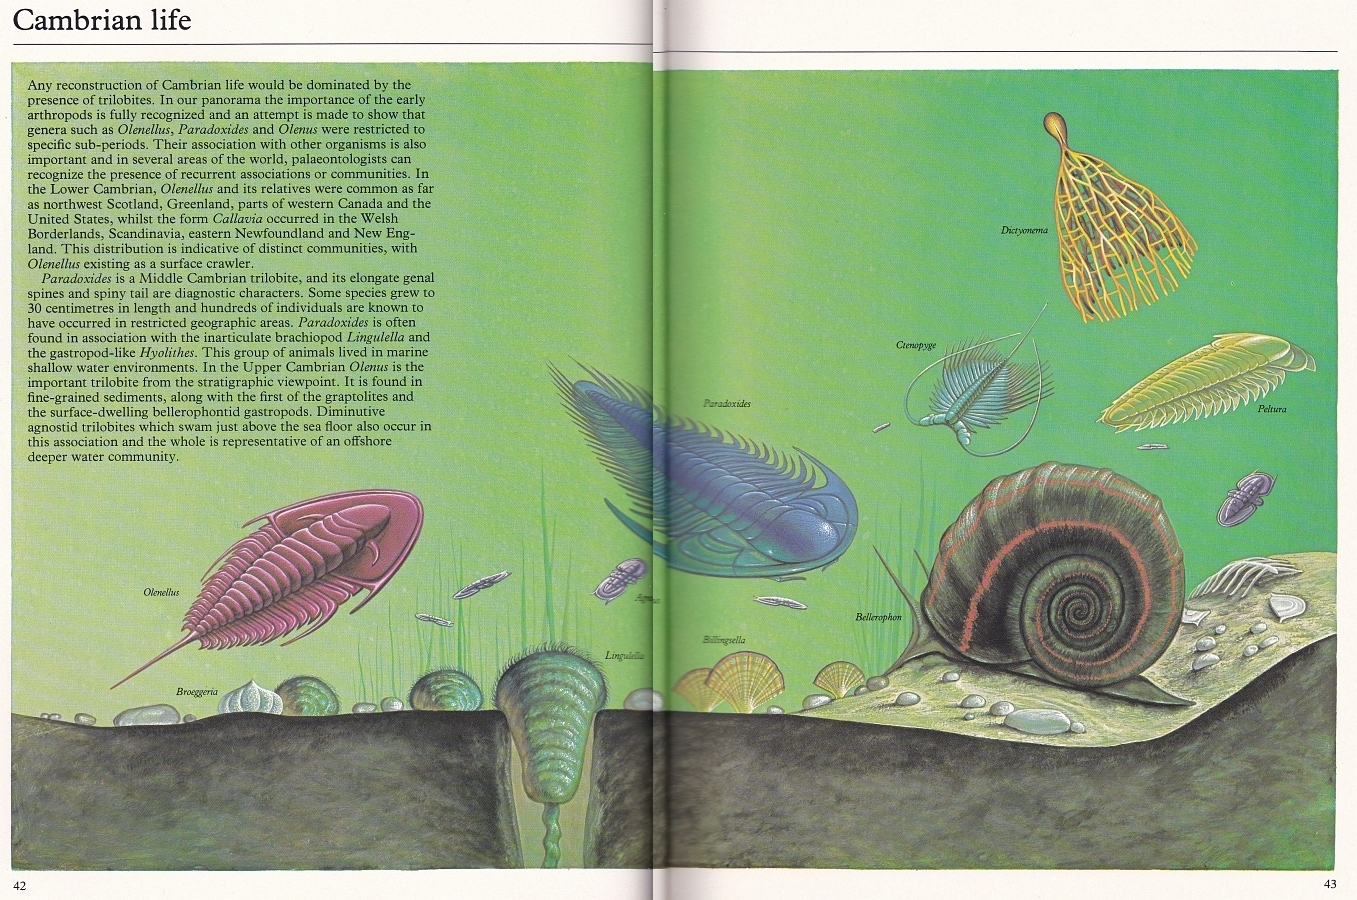 Cambrian life by George Thompson